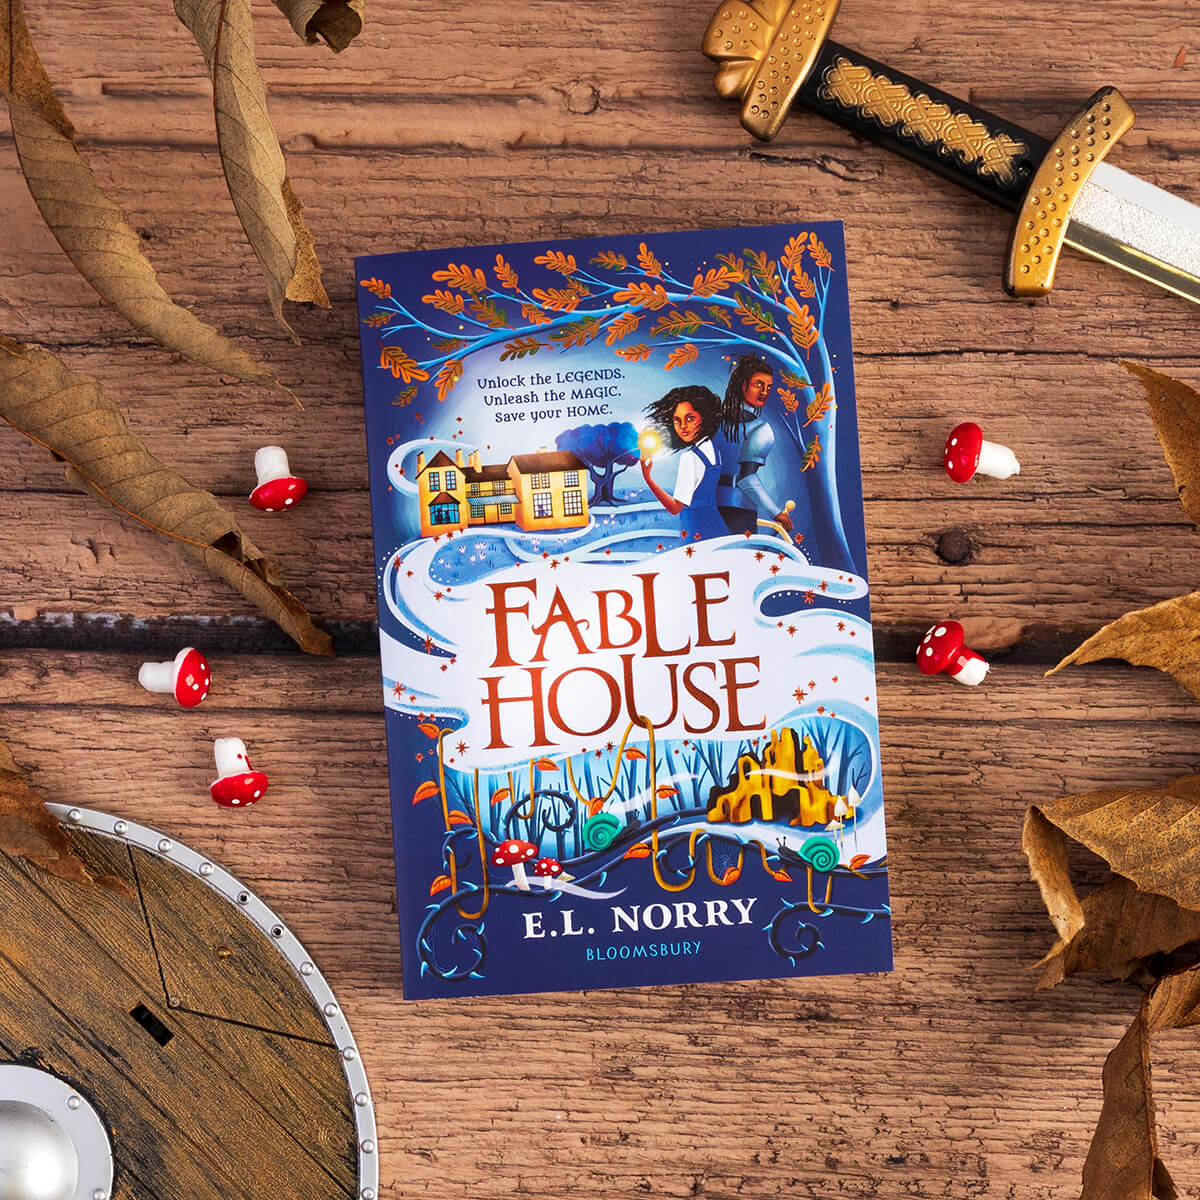 Fablehouse book surround by decorative woodland items, including toadstools, and a sword.